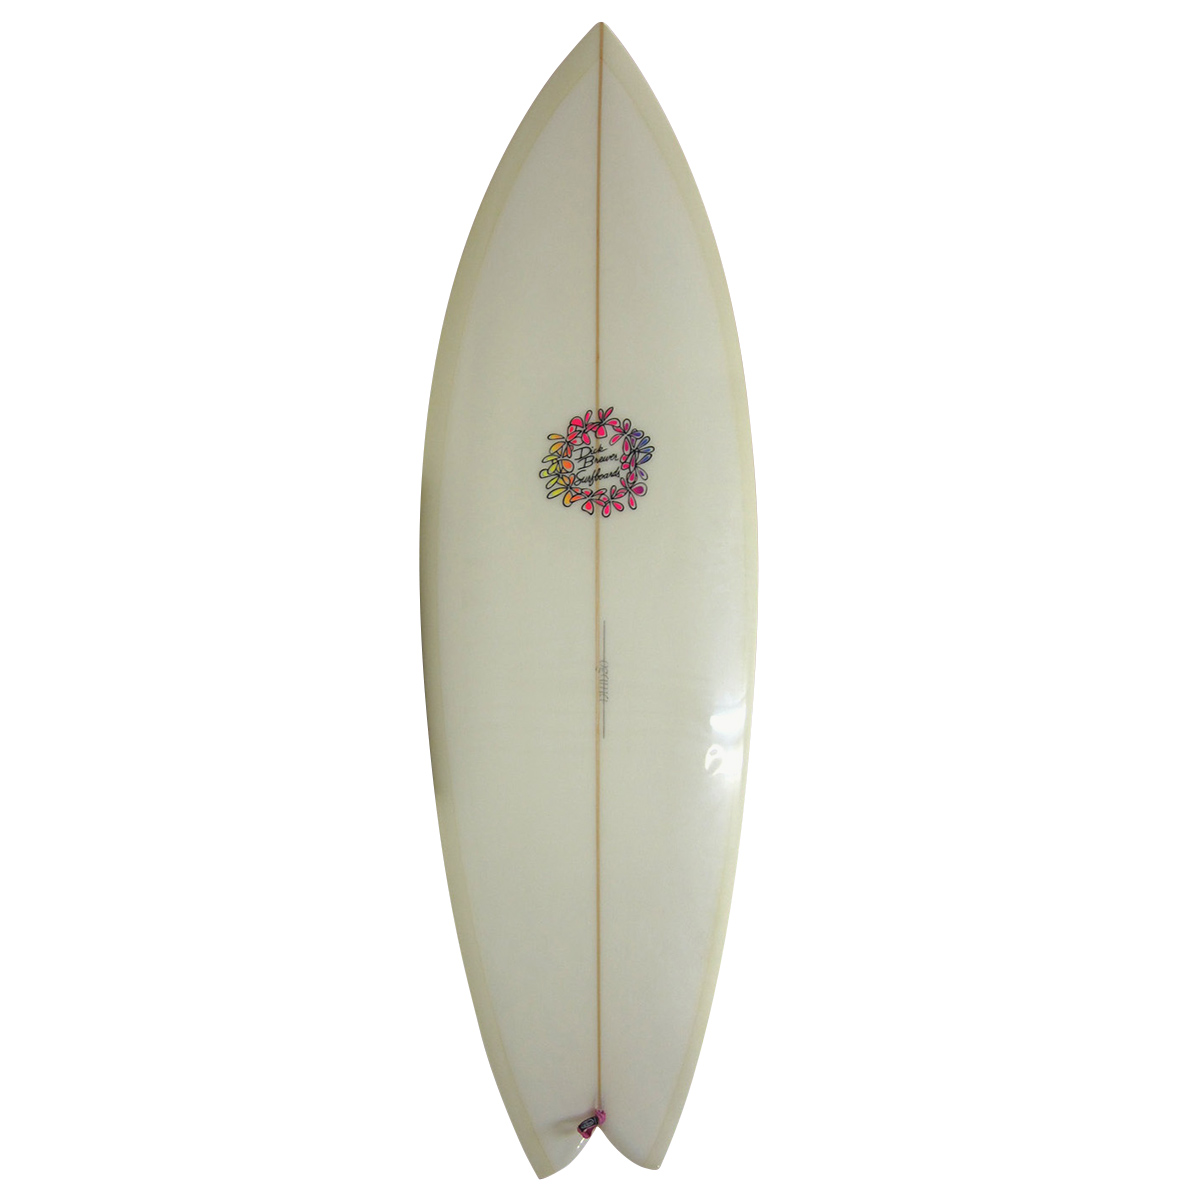 Dick Brewer / Fish Custom 5'10 Shaped By OGAMA